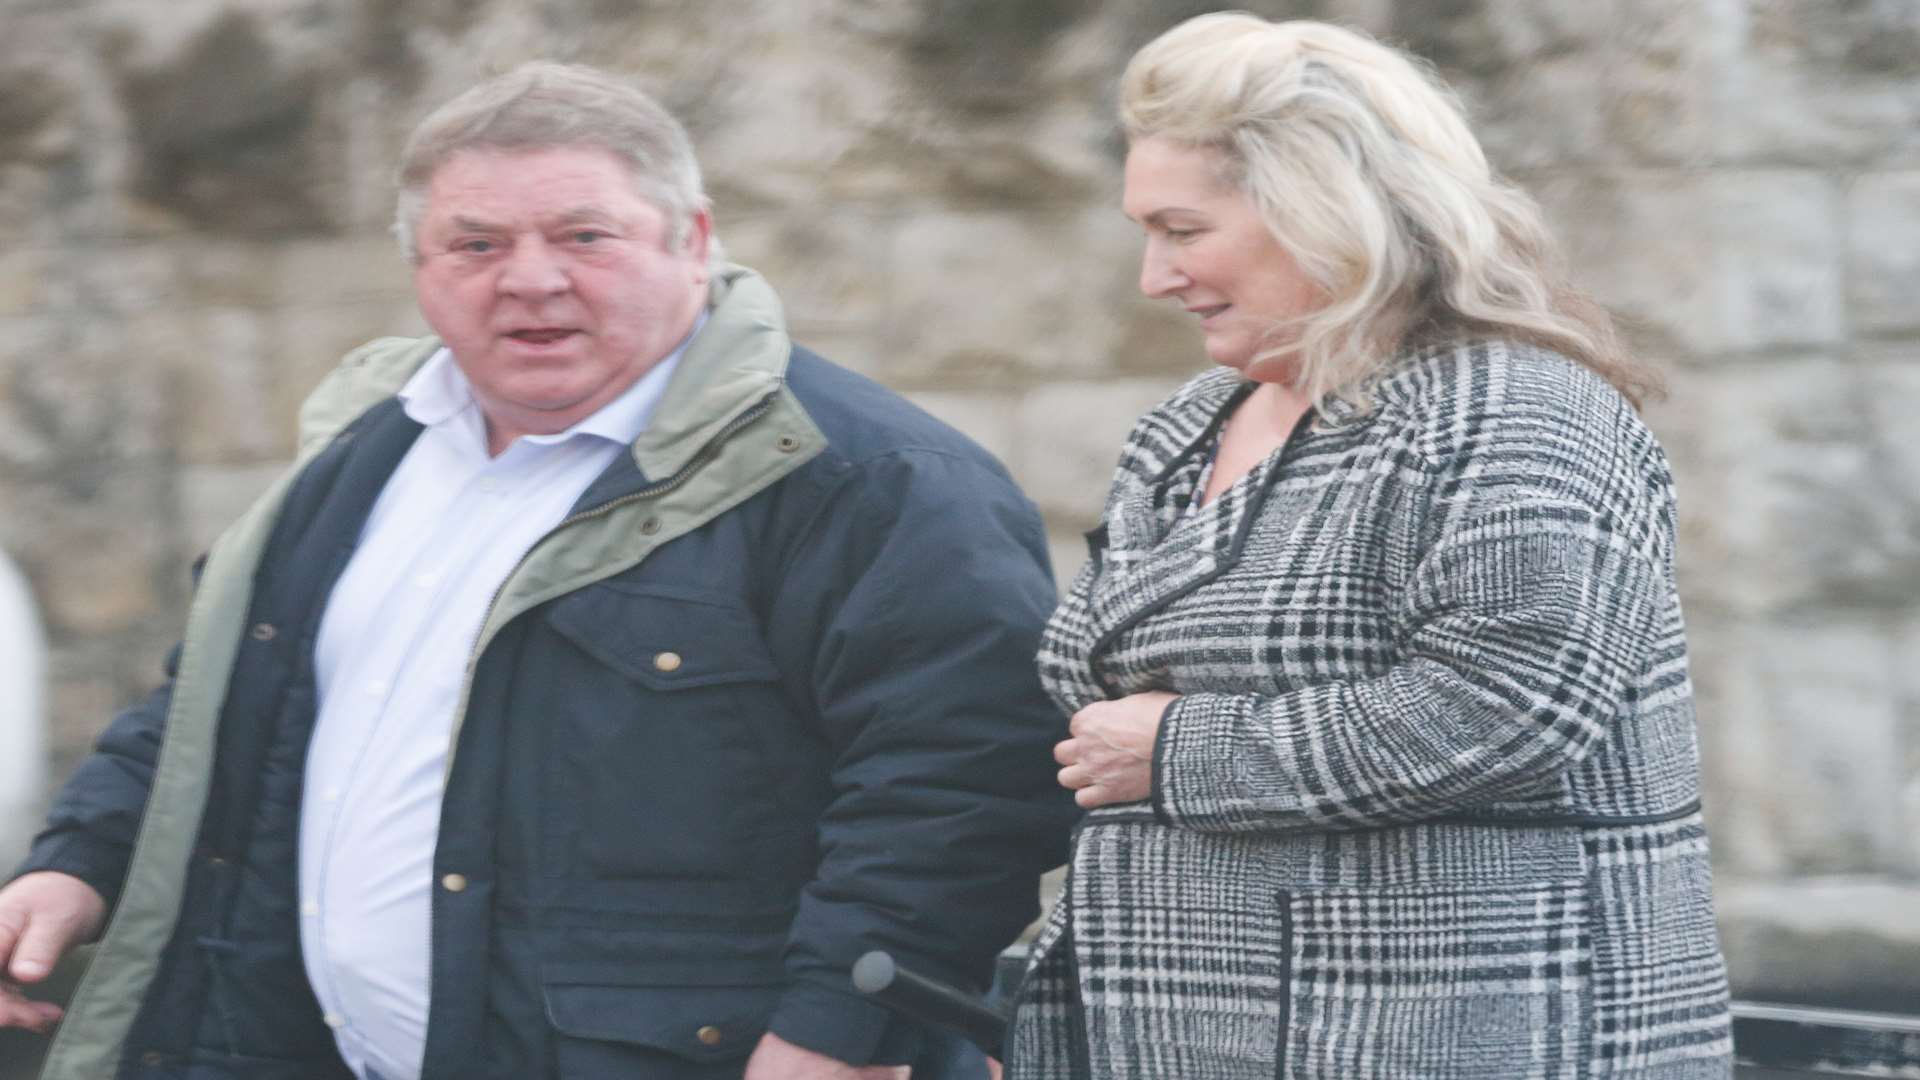 Jerry and Catherine McCann appearing at Maidstone Magistrates Court